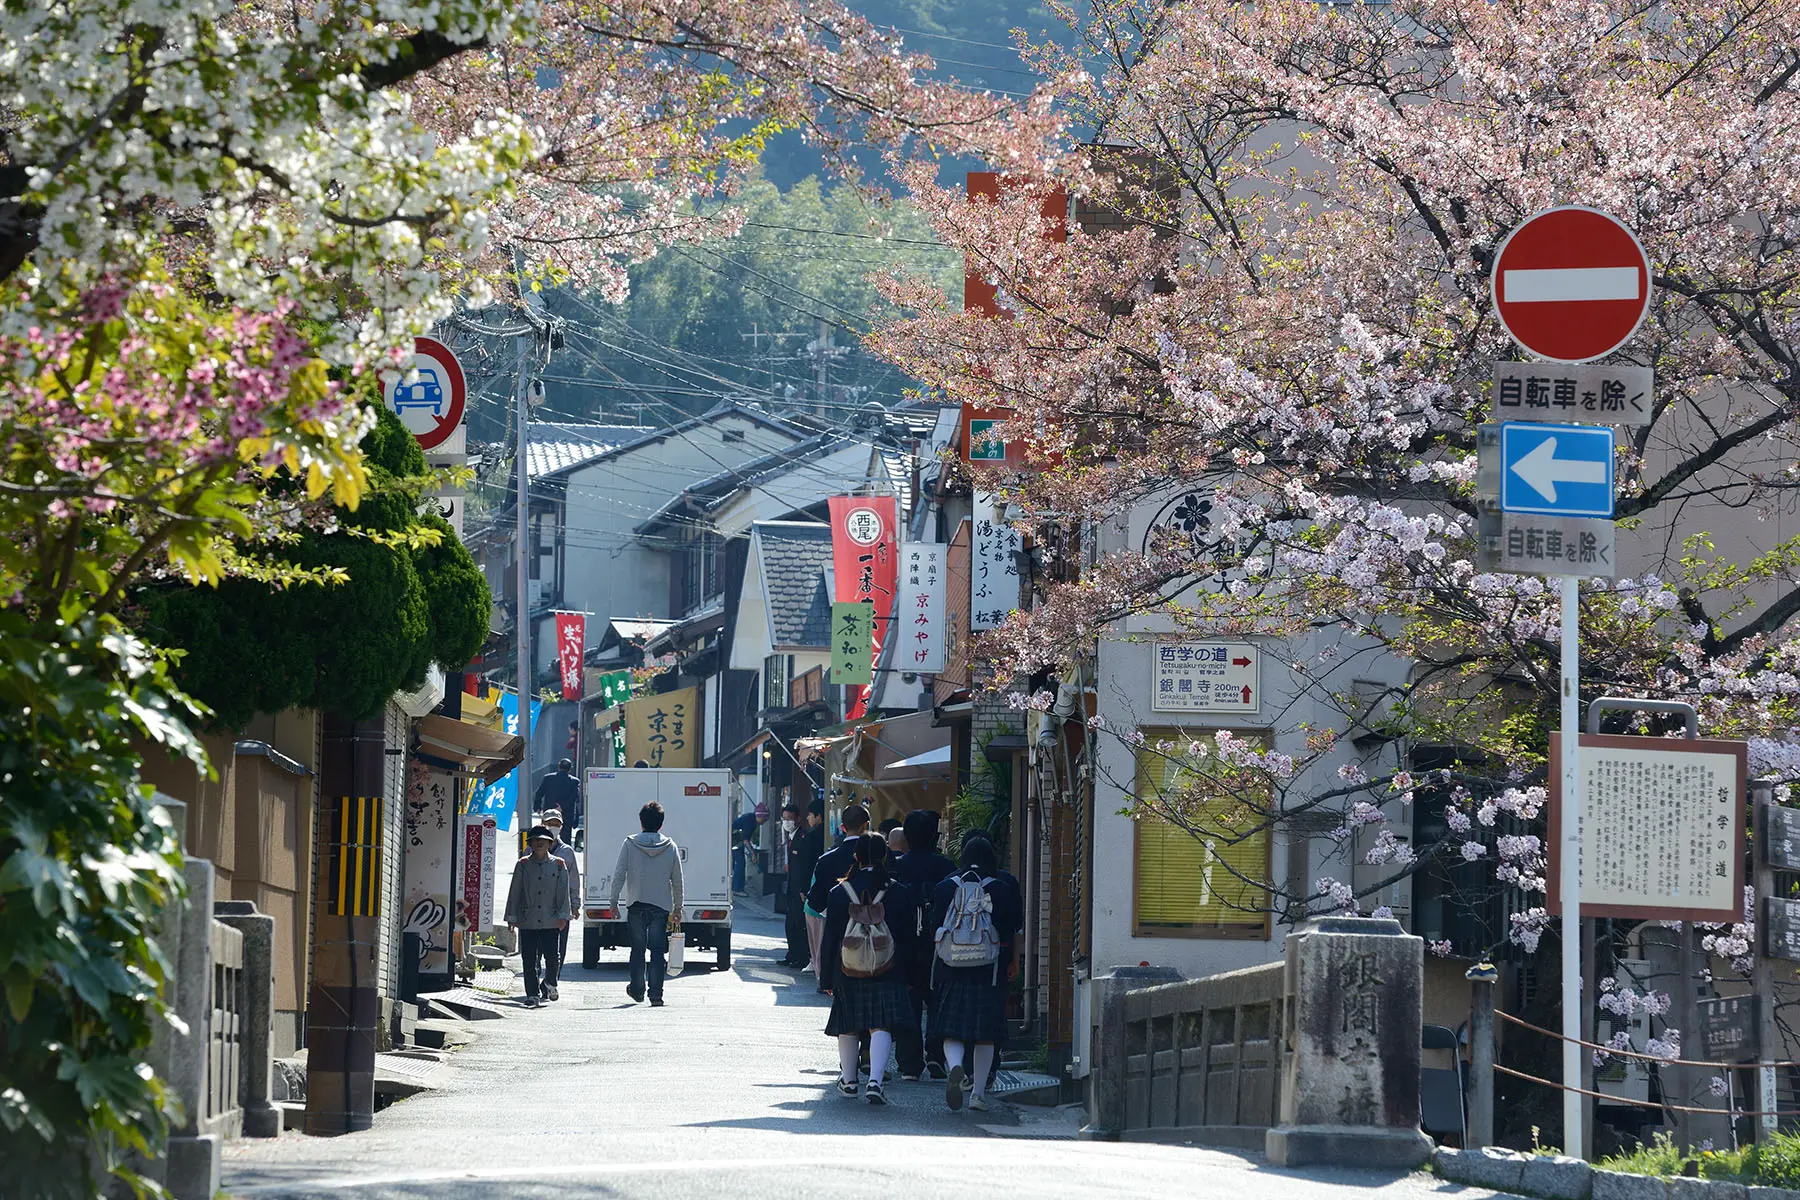 Residents walking through a street in Kyoto on a spring day.